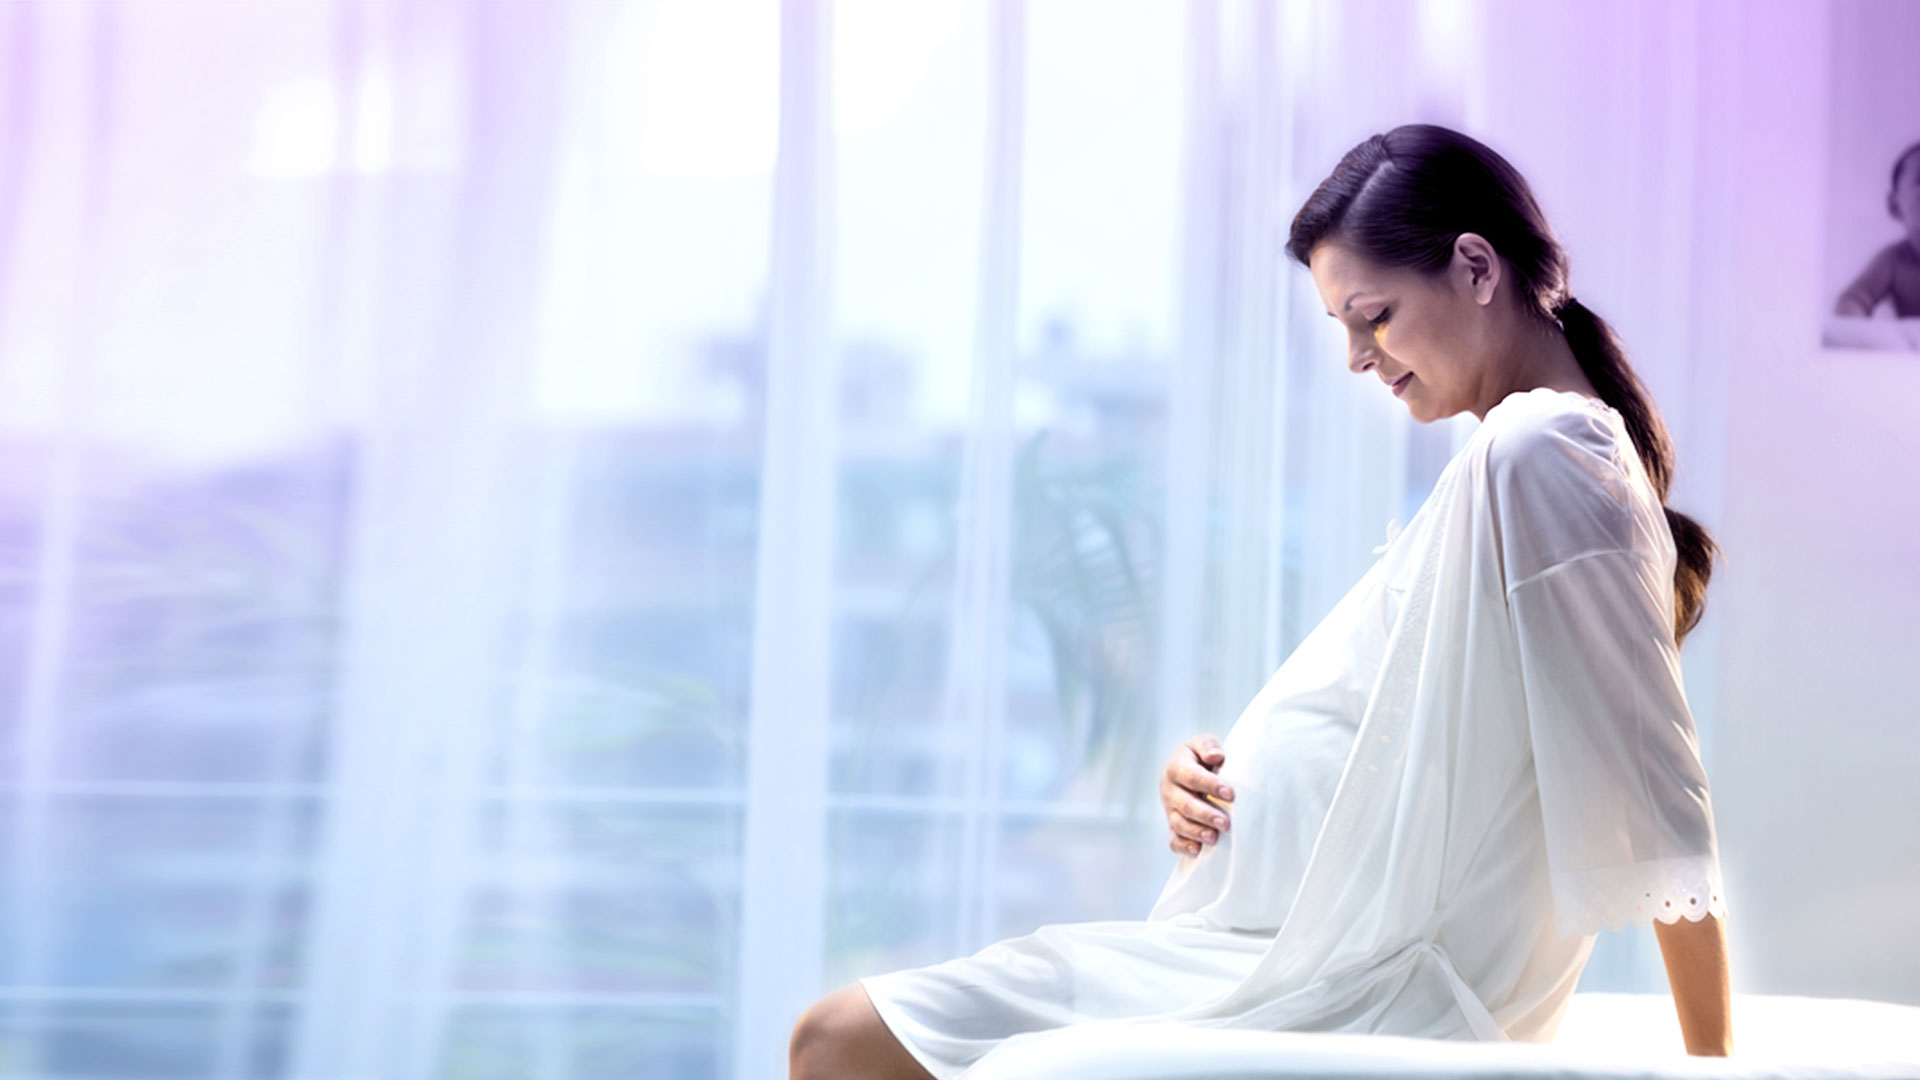 lxp-lifexpe-swelling-in-pregnancy-how-to-get-rid-of-them-pregnancy